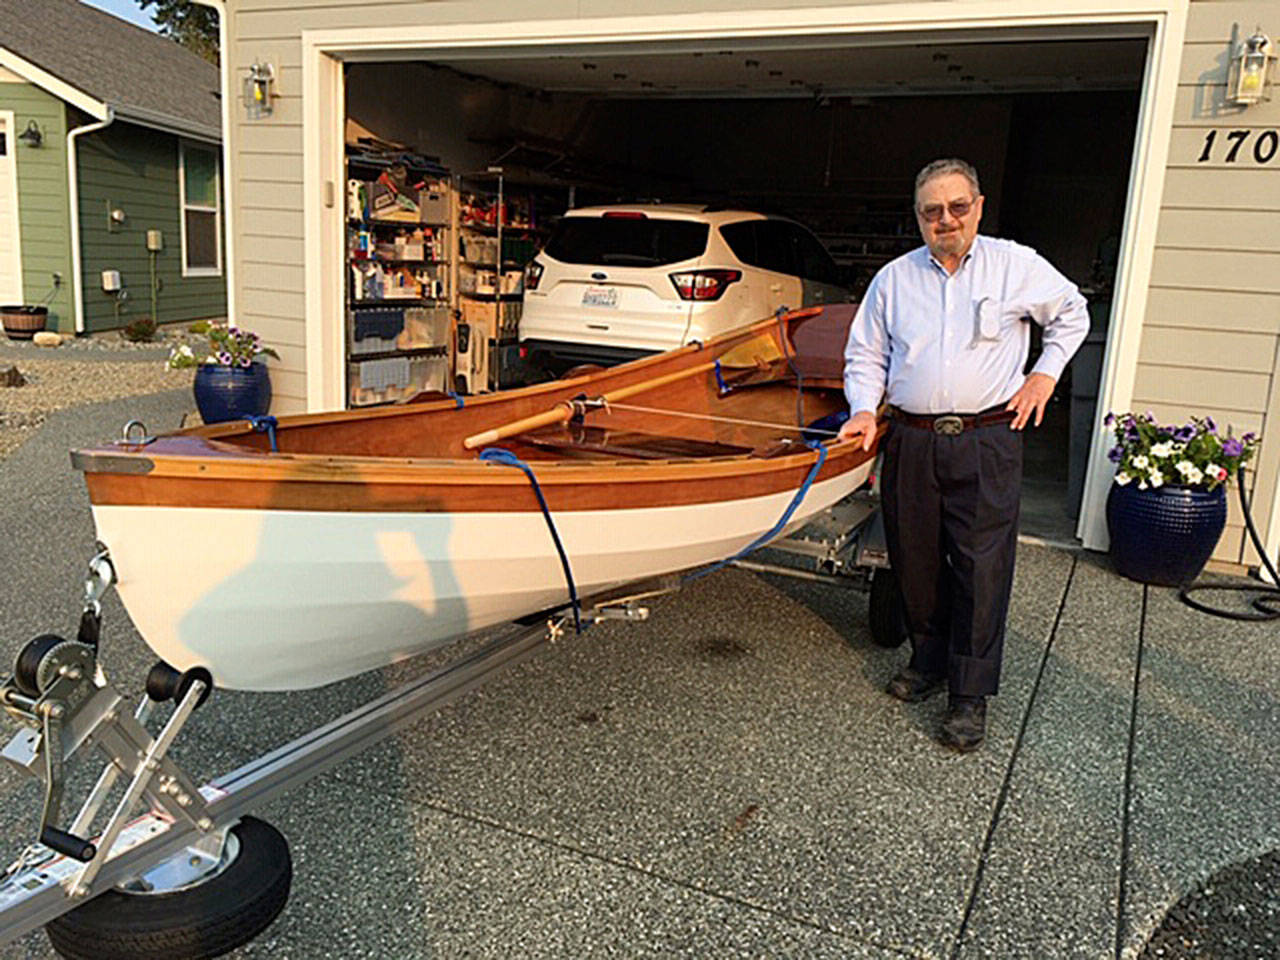 David Hough, 83, of Sequim built a boat more than 70 years ago before he became a motorcycle enthusiast. Now retired, he spent the past six months building a boat from a kit. (Submitted photo)